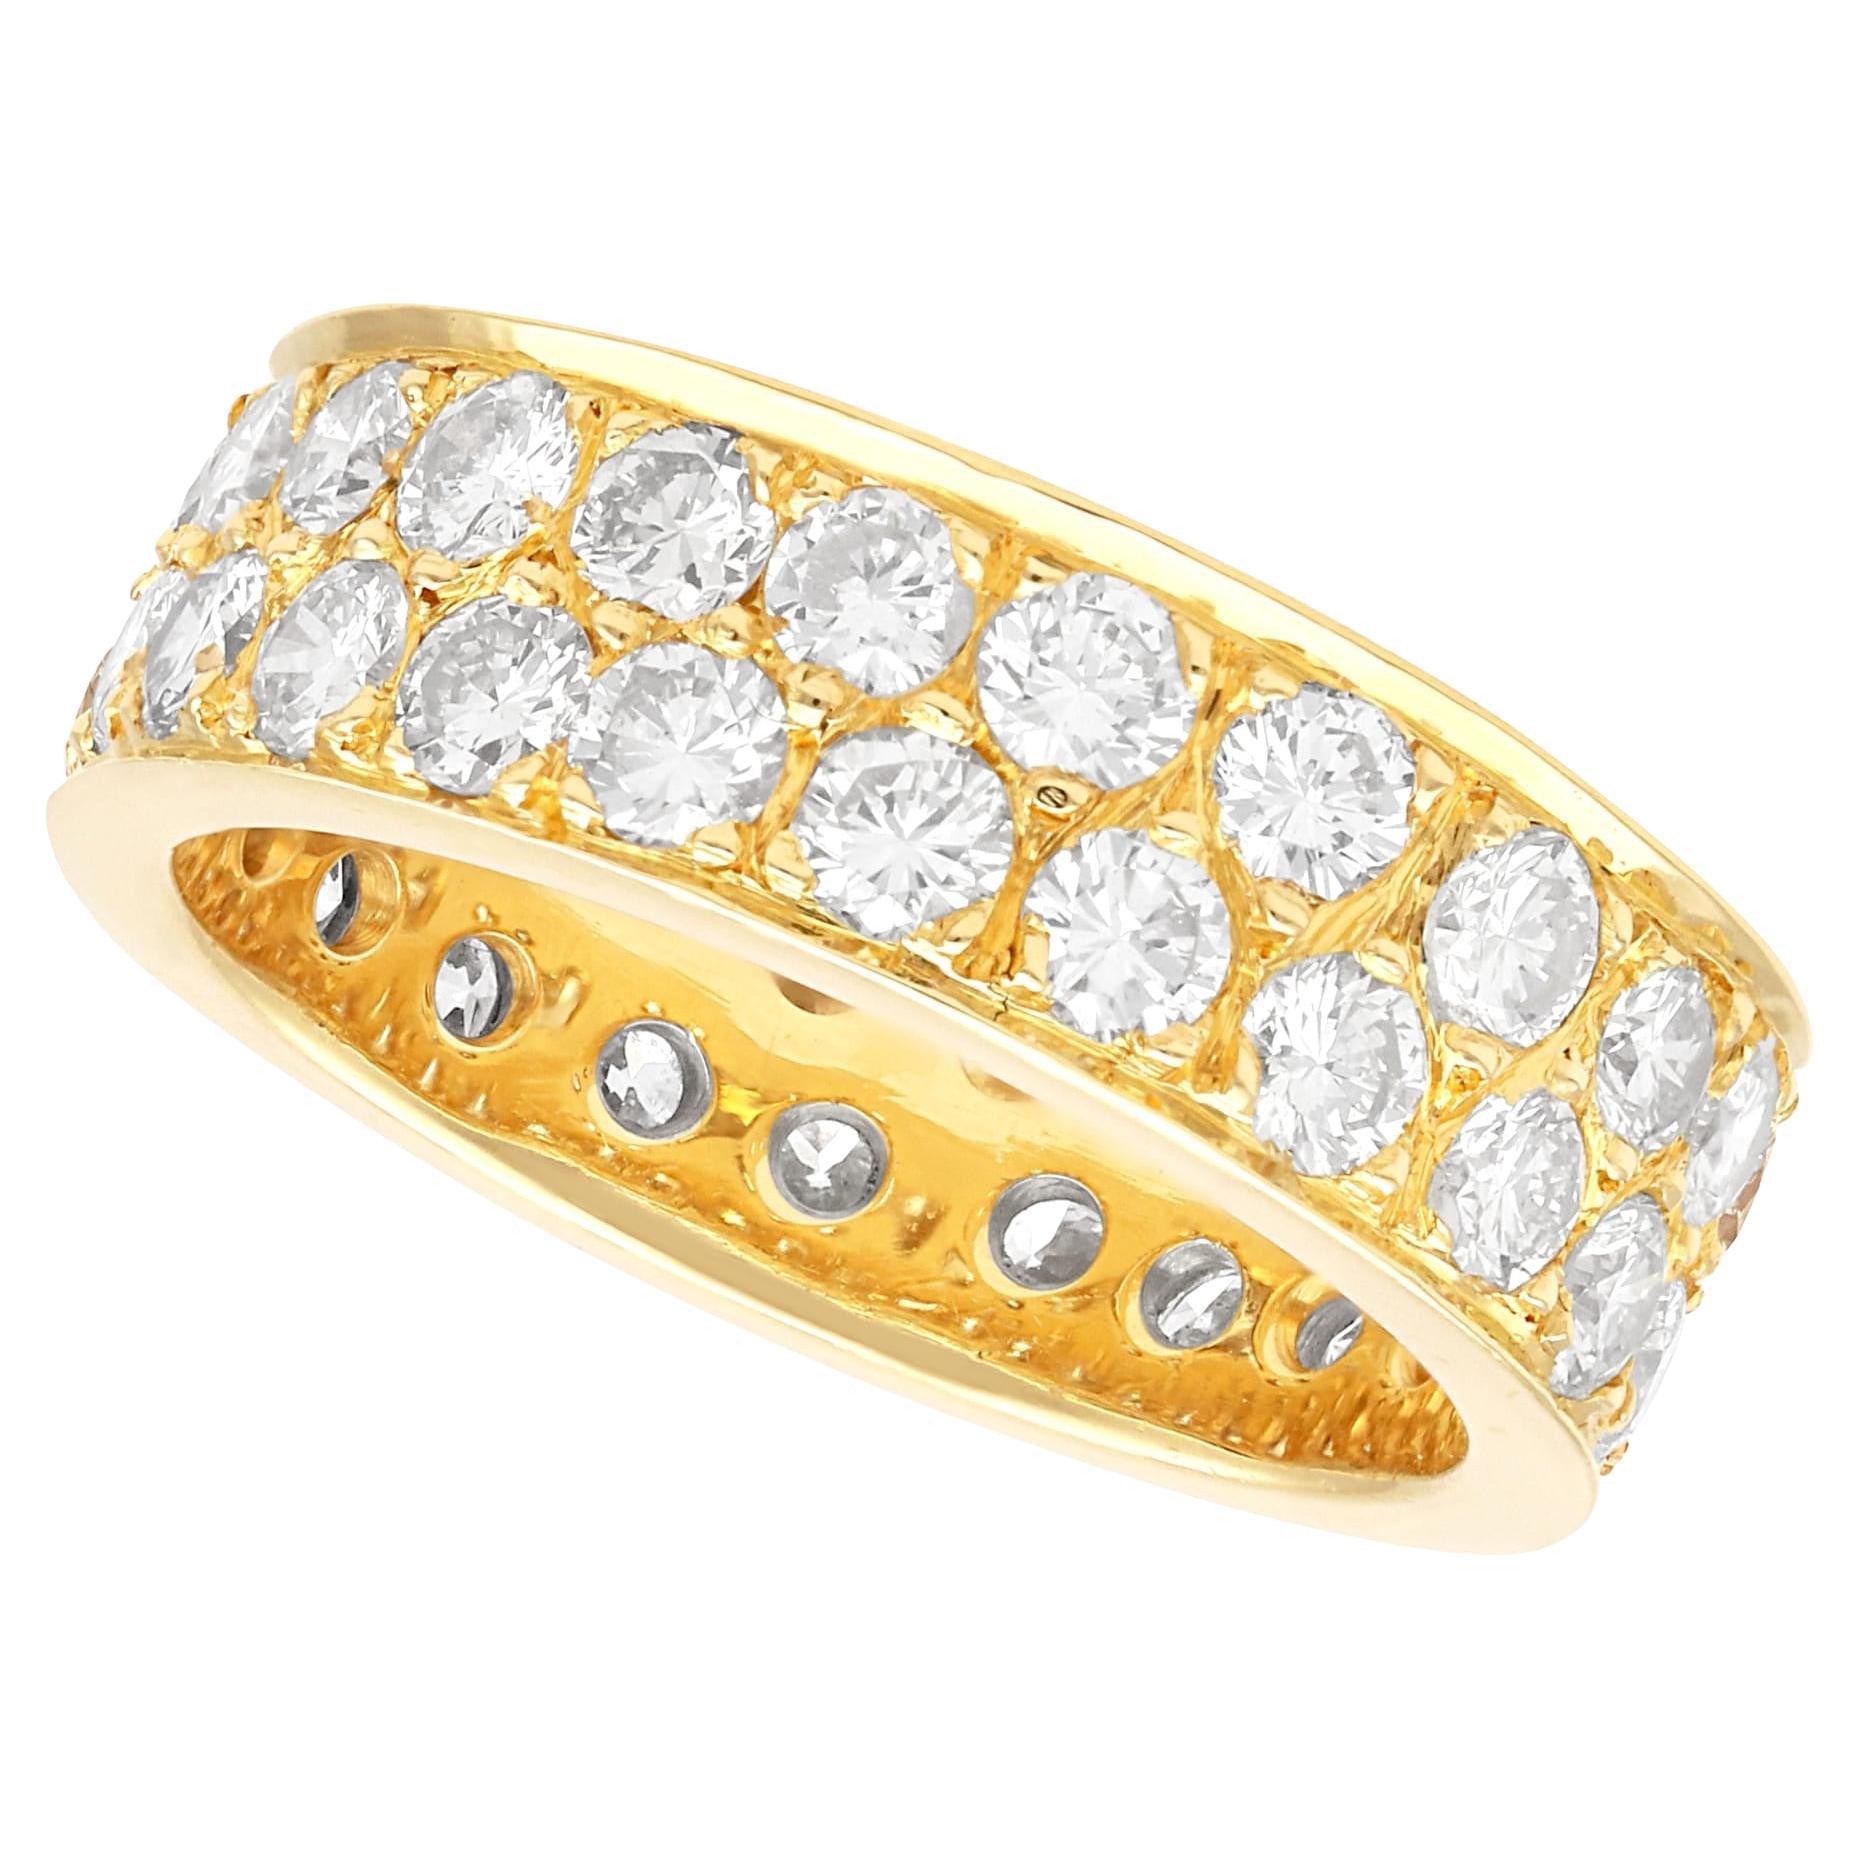 Vintage 2.42 Carat Diamond and 18k Yellow Gold Double Eternity Ring  For Sale